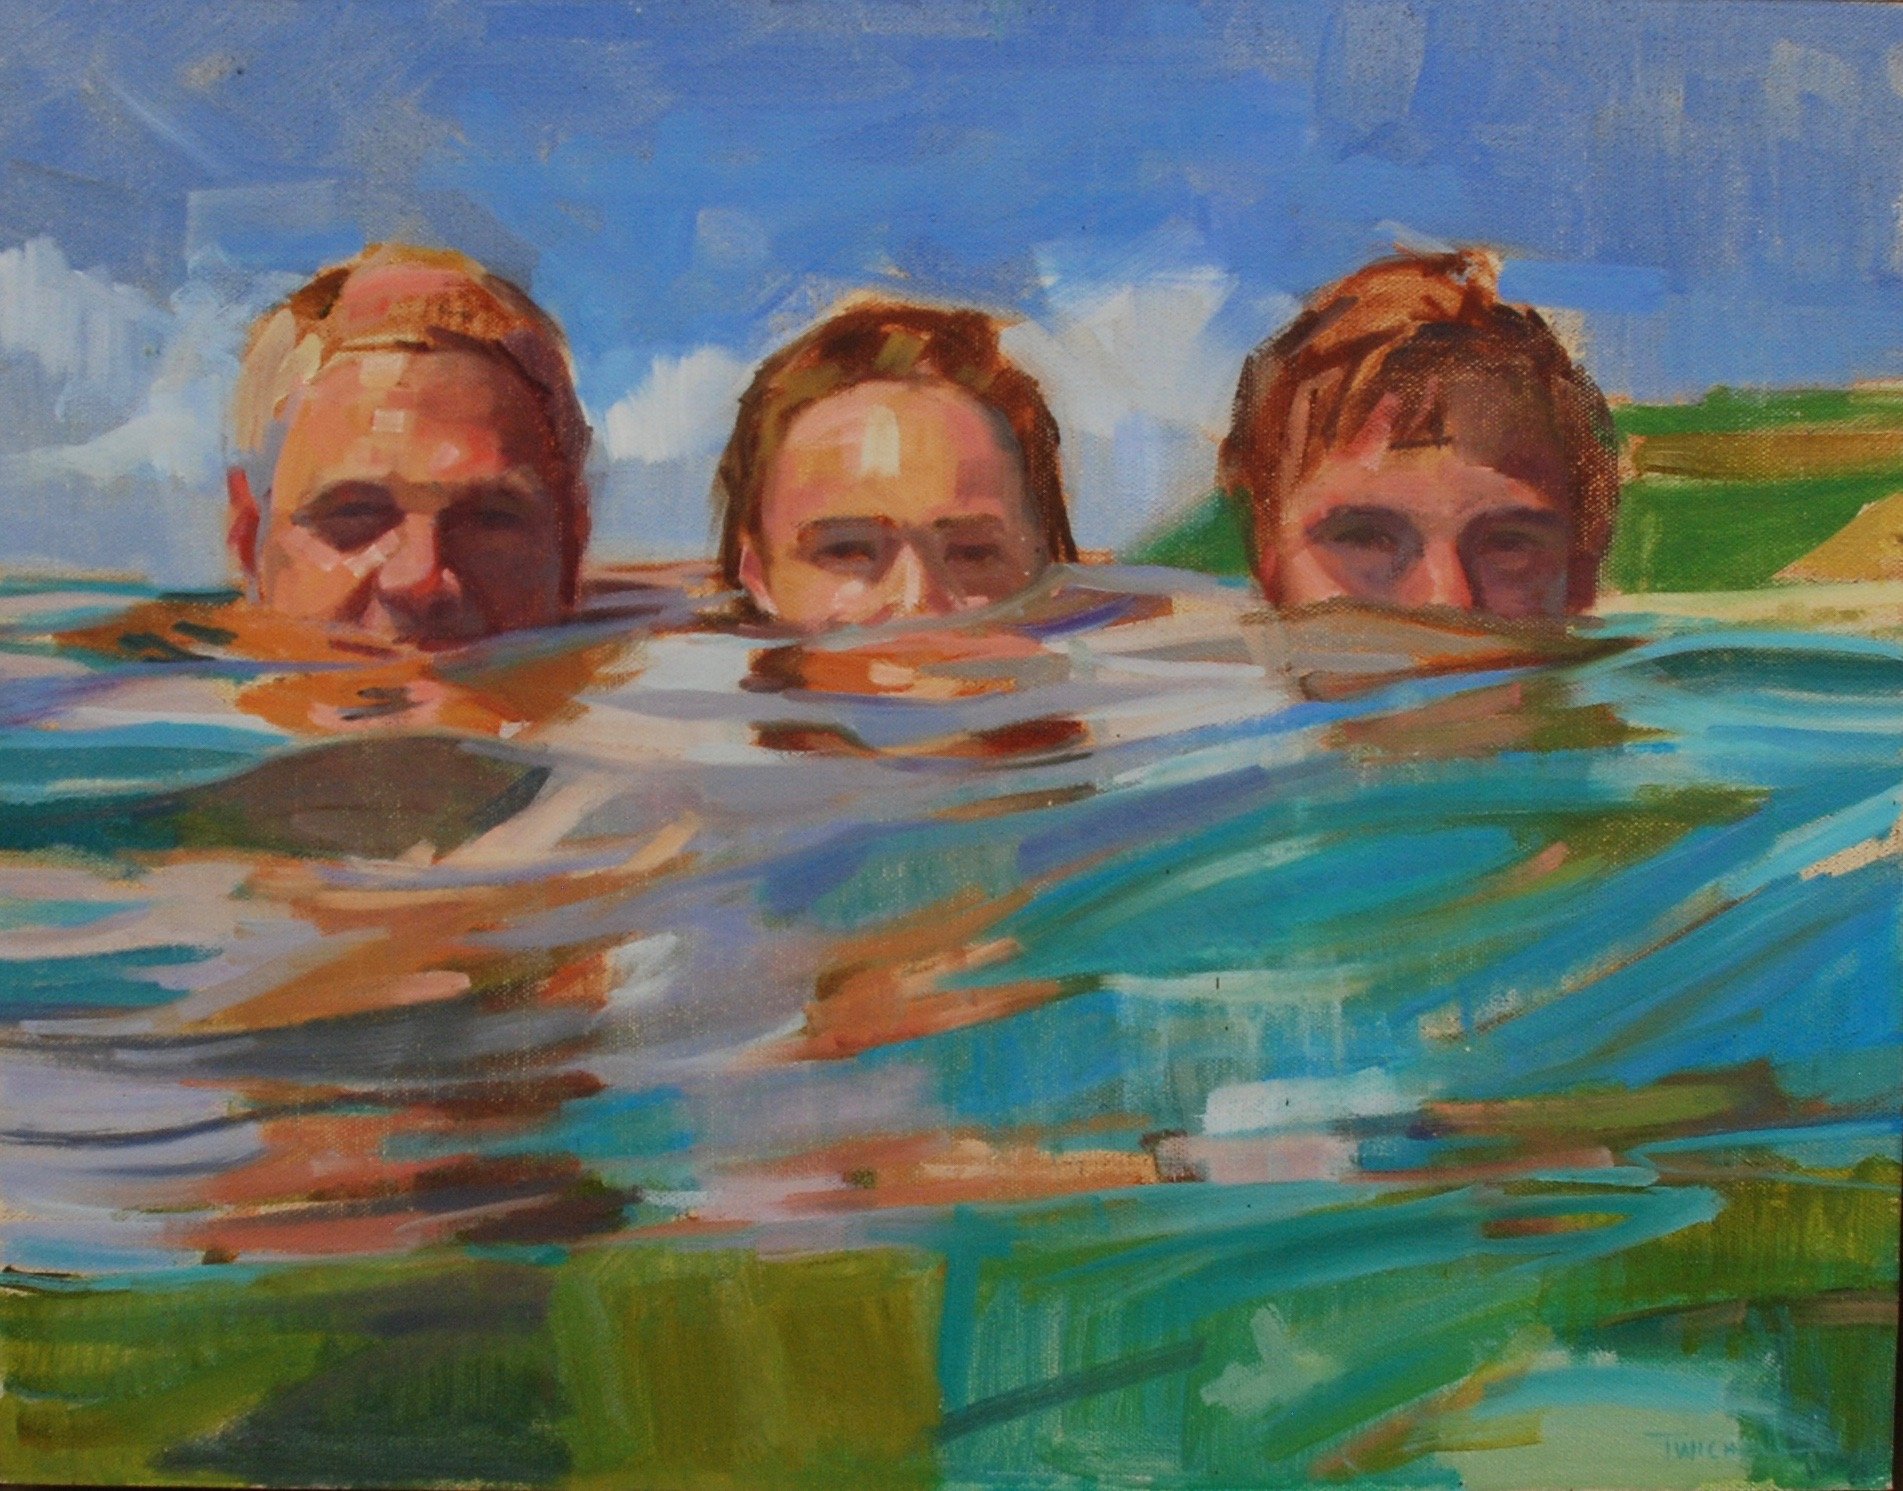 Submerged Smiles by Phoebe Peterson, 2023